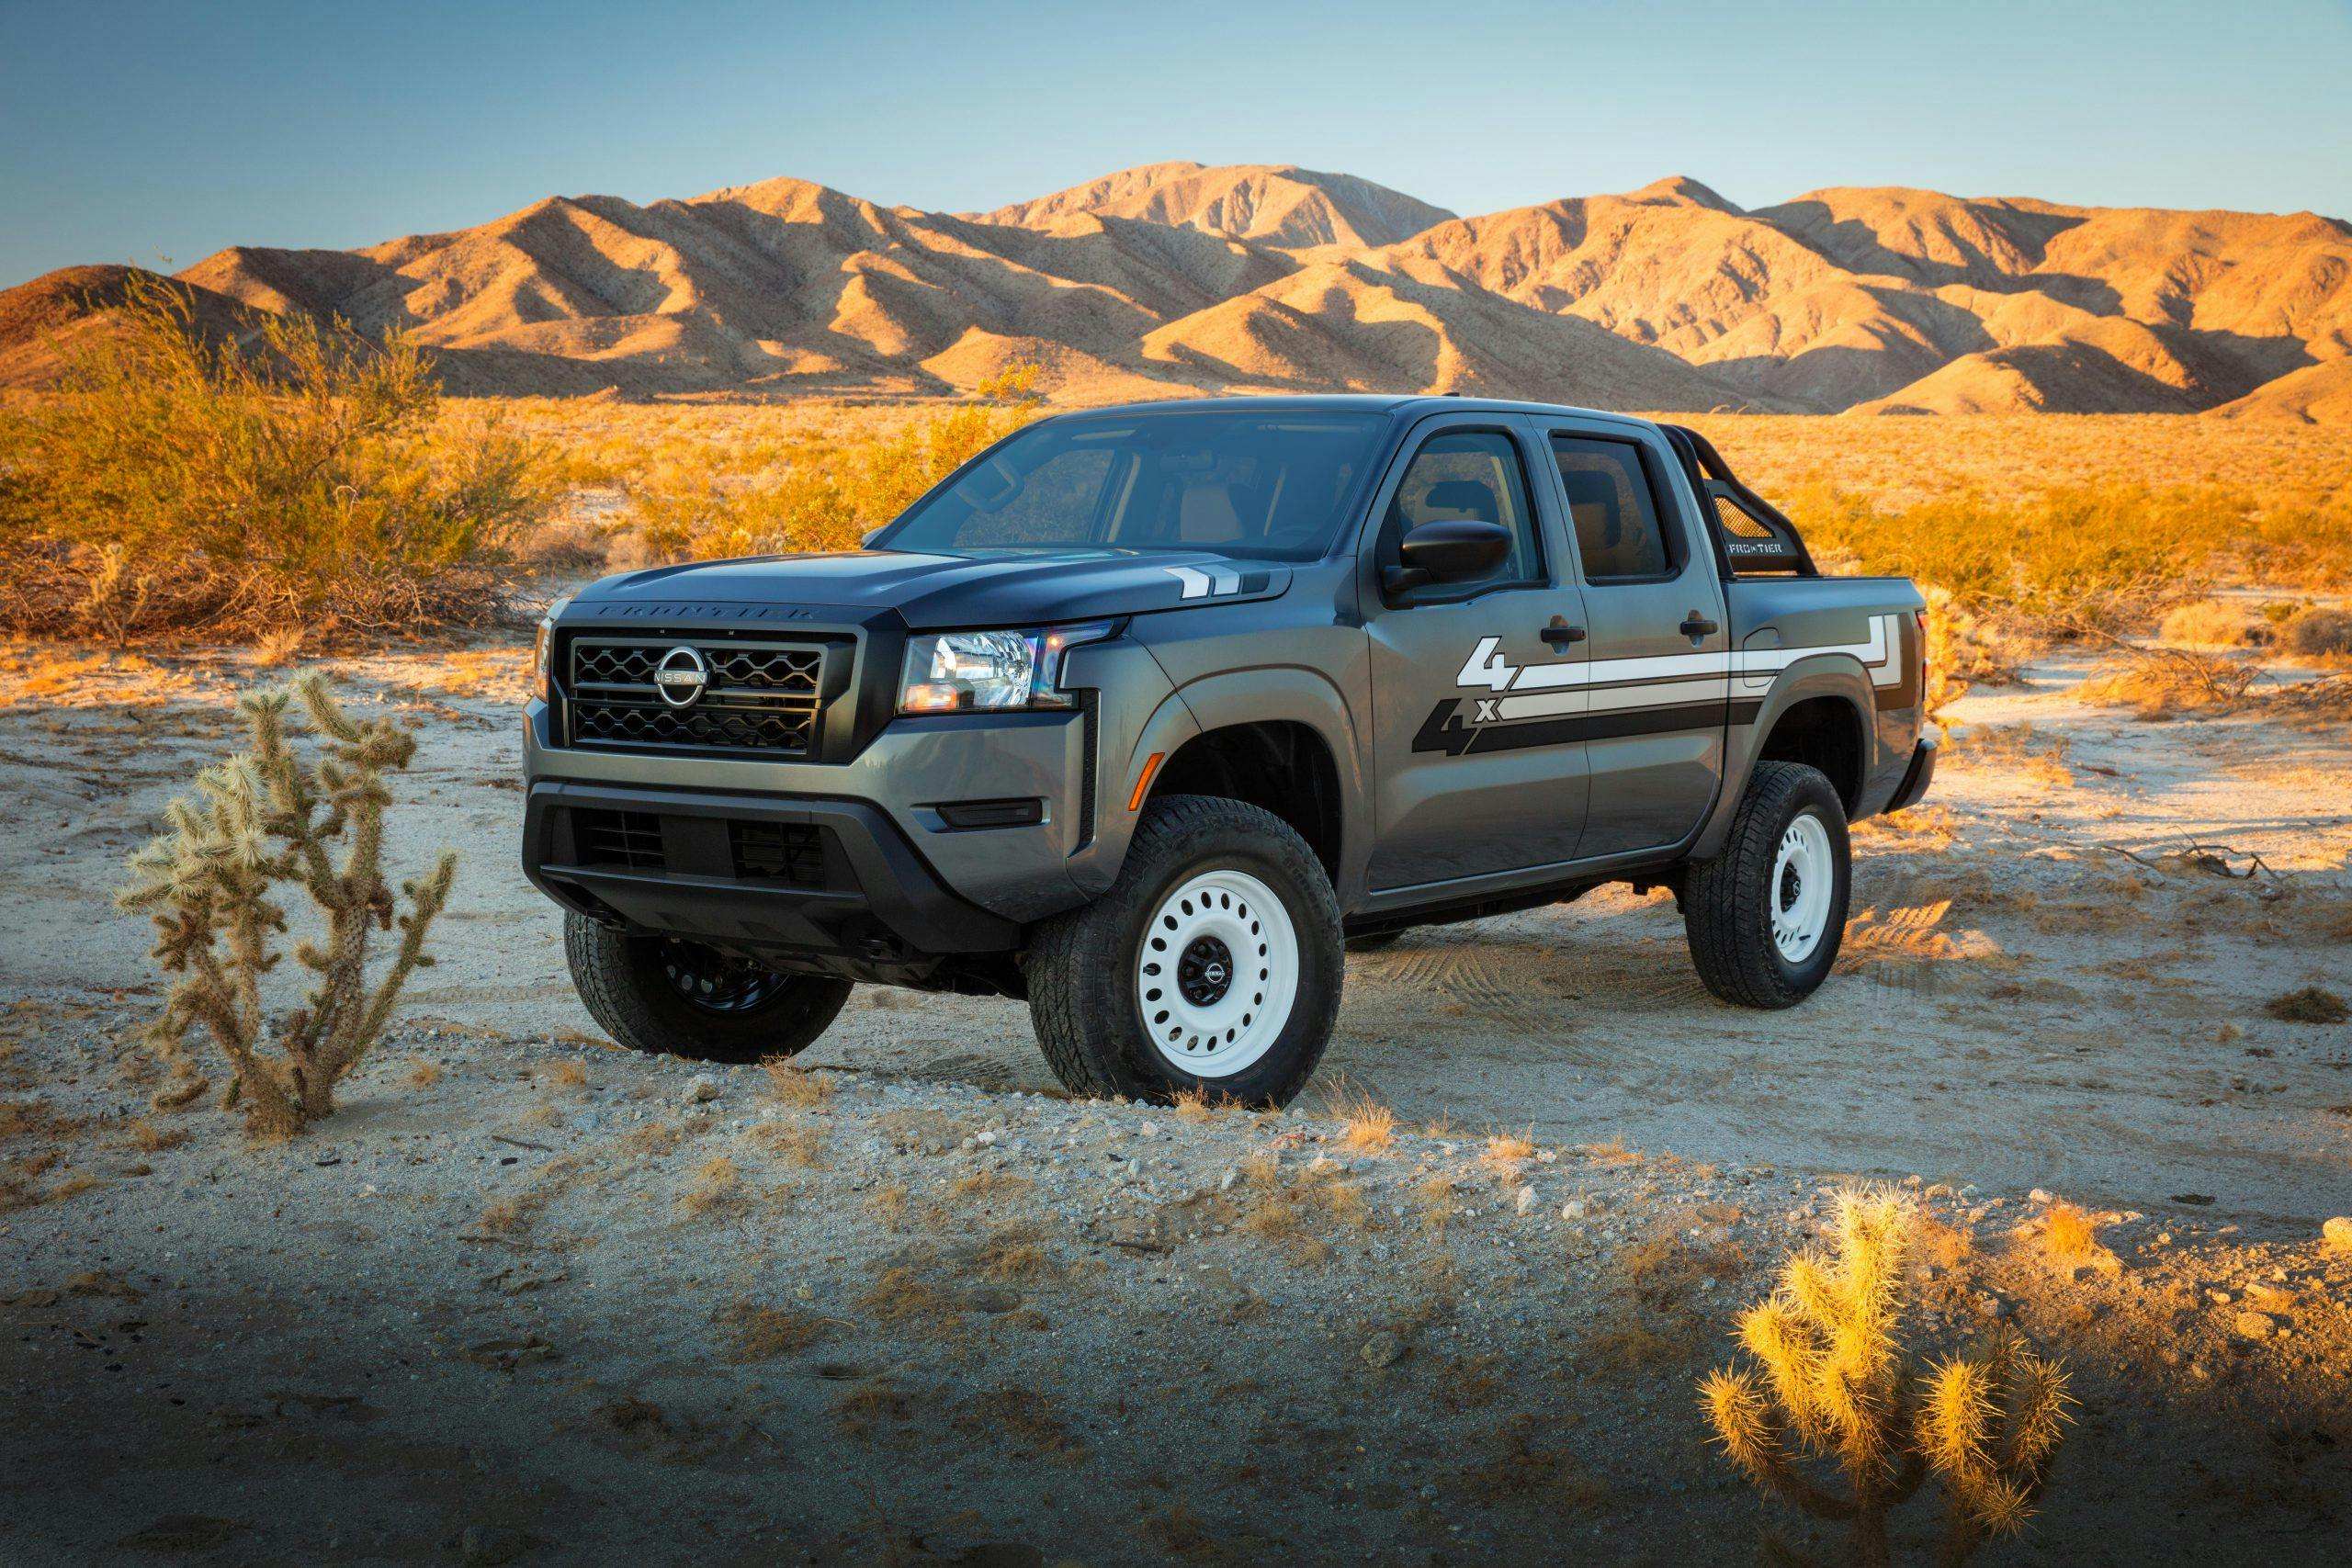 Nissan Frontier Project 72X Concept front three quarter